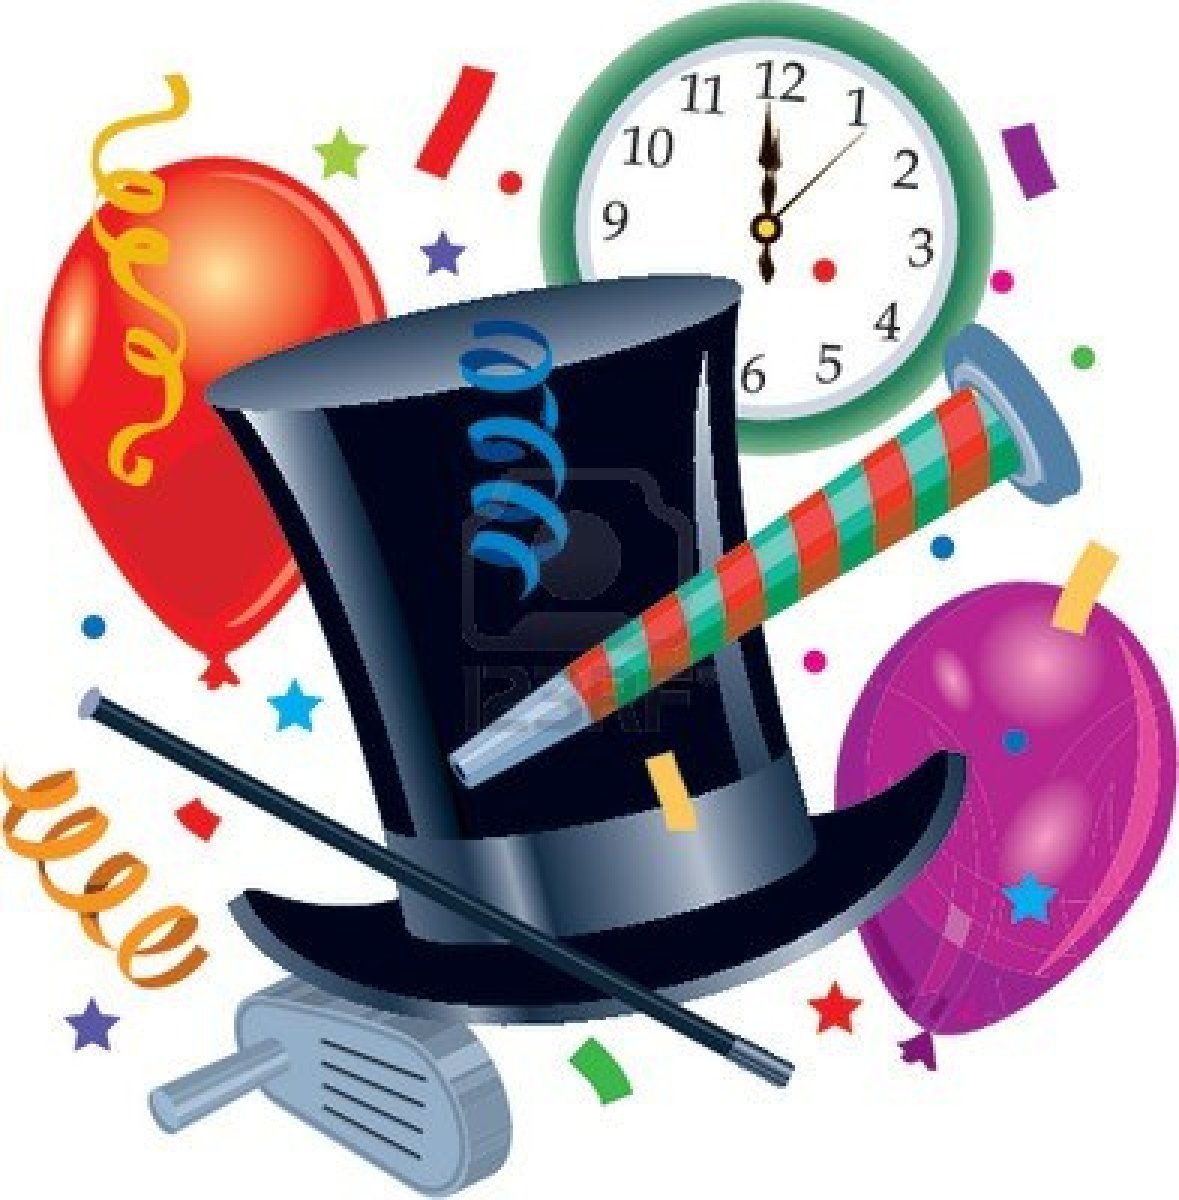 New Years Eve Clip Art - ClipArt Best